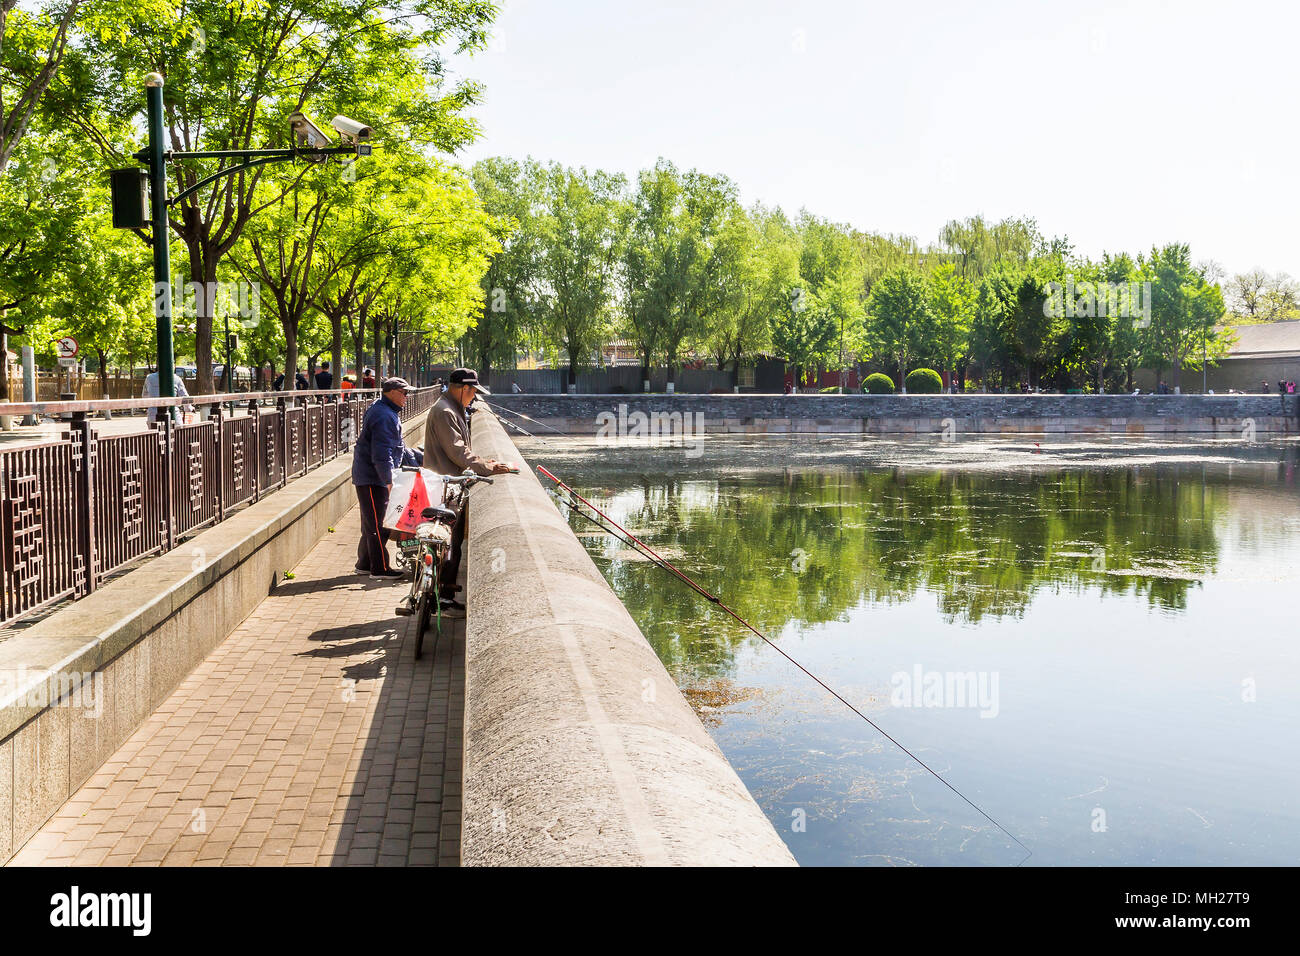 A Chinese man fishing with friends in the moat which circles the Forbidden City, Beijing China. Above them a surveillance camera keeps watch. Stock Photo